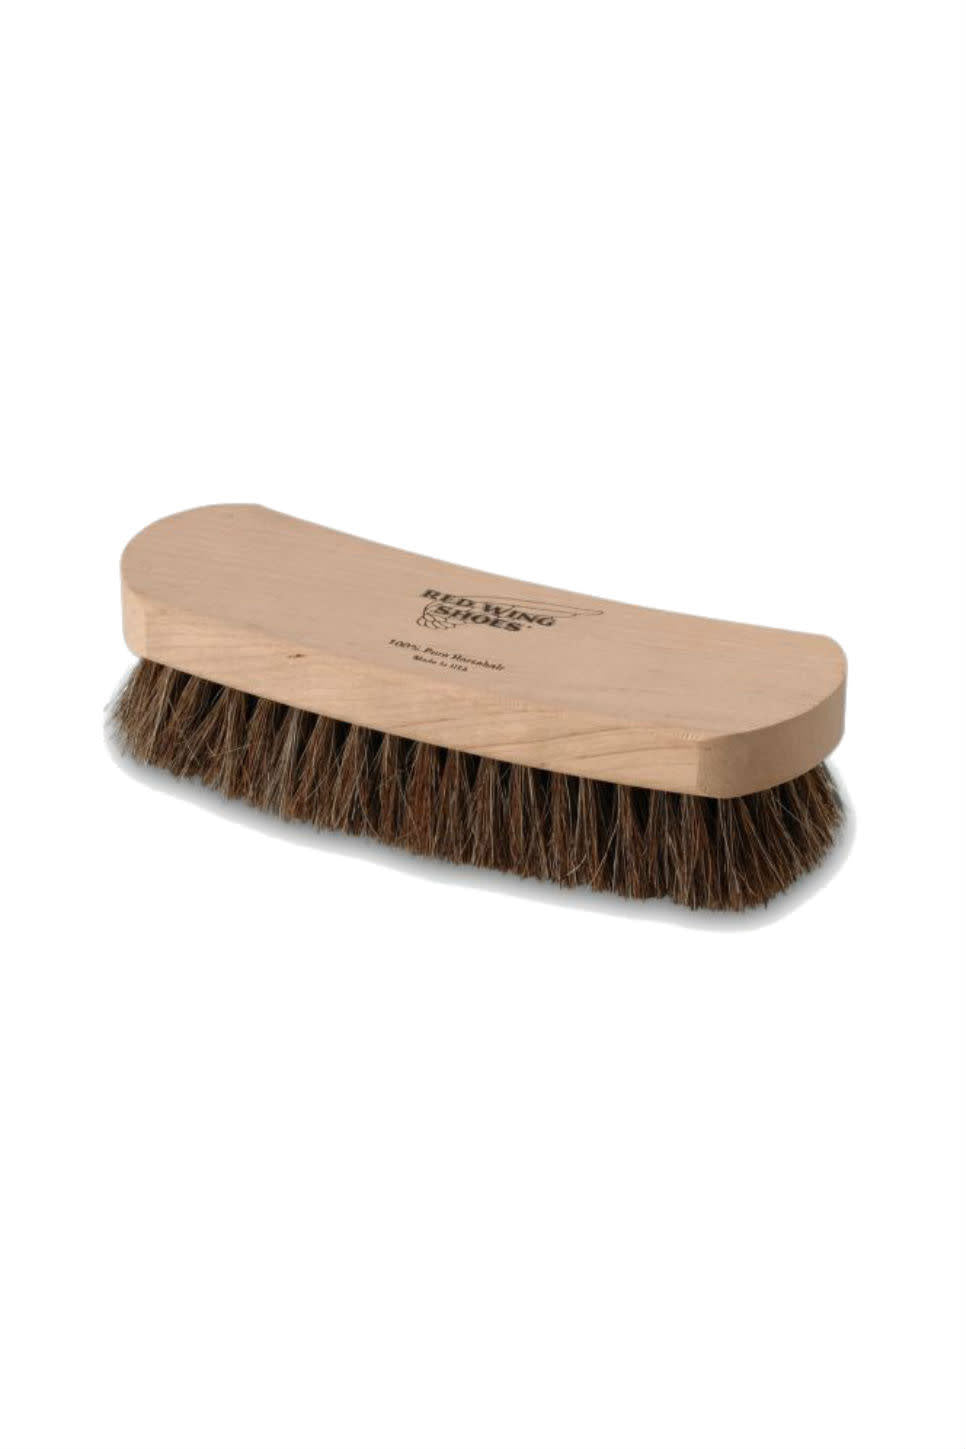 RED WING BOOT BRUSH